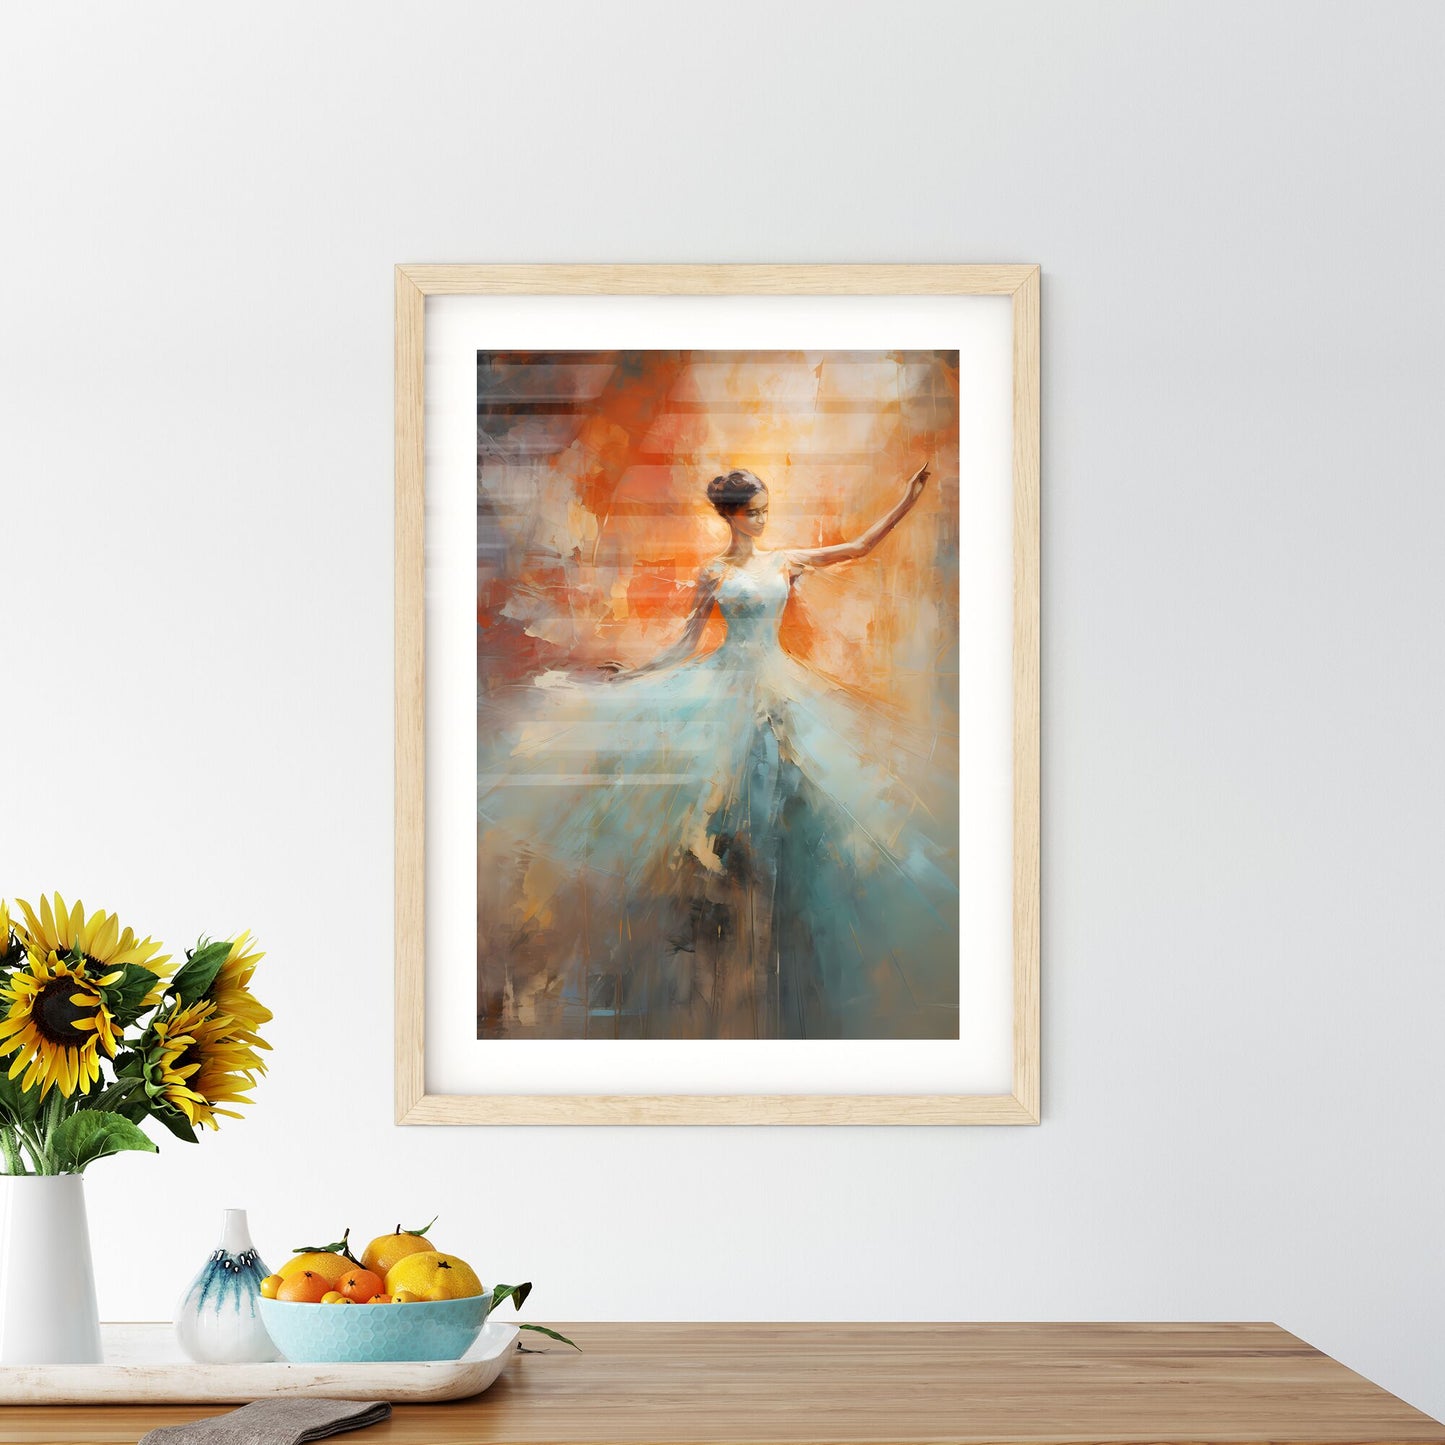 The Ballerina - A Painting Of A Woman In A White Dress Default Title